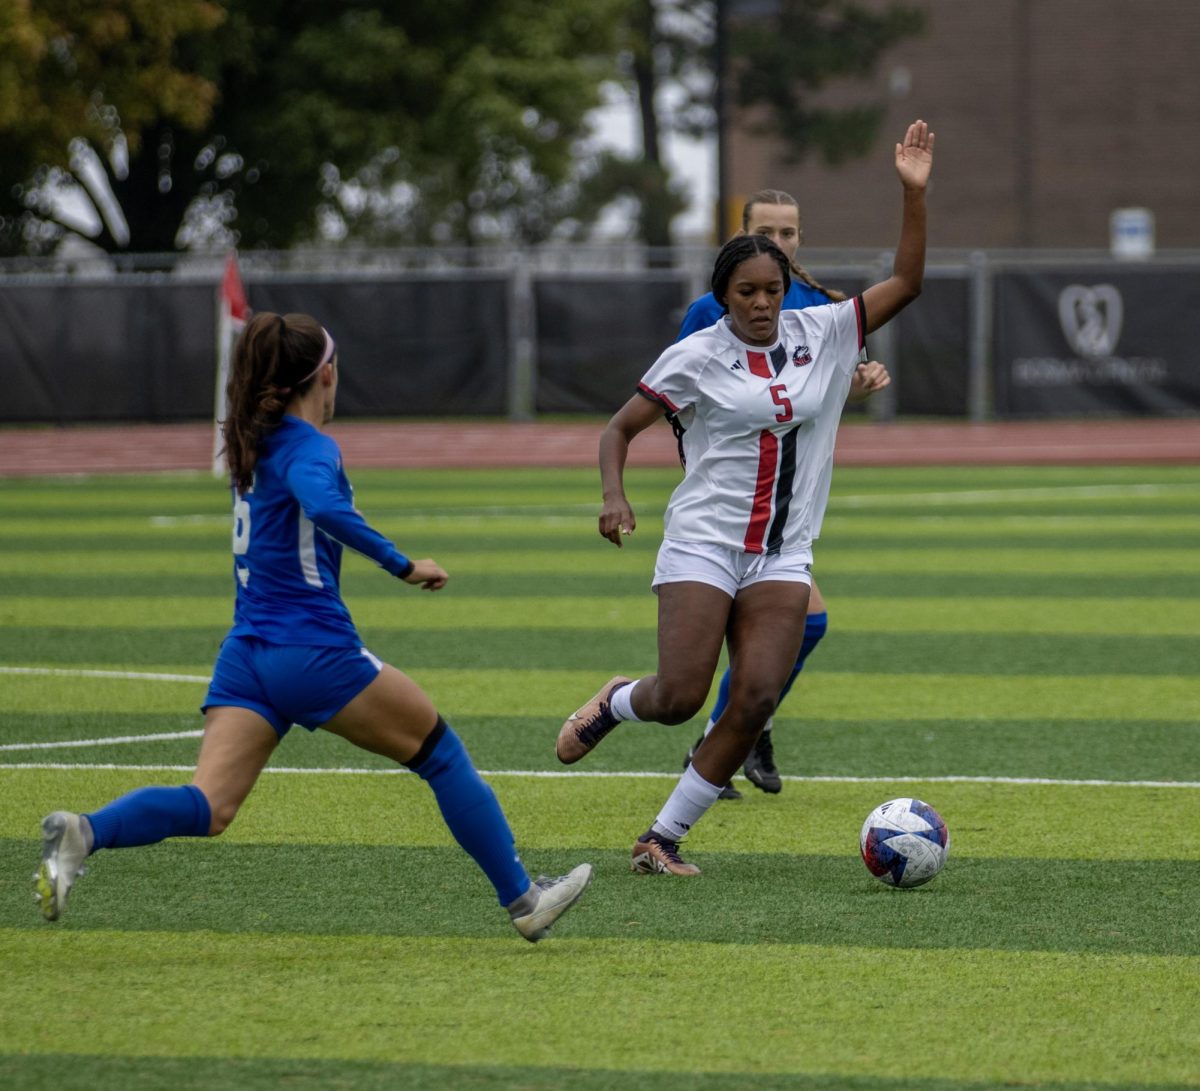 Freshman forward Tyra King dribbles the ball past a University at Buffalo defender. NIU womens soccer defeated Ball State University on Thursday after a last-minute goal from King. (Tim Dodge | Northern Star)